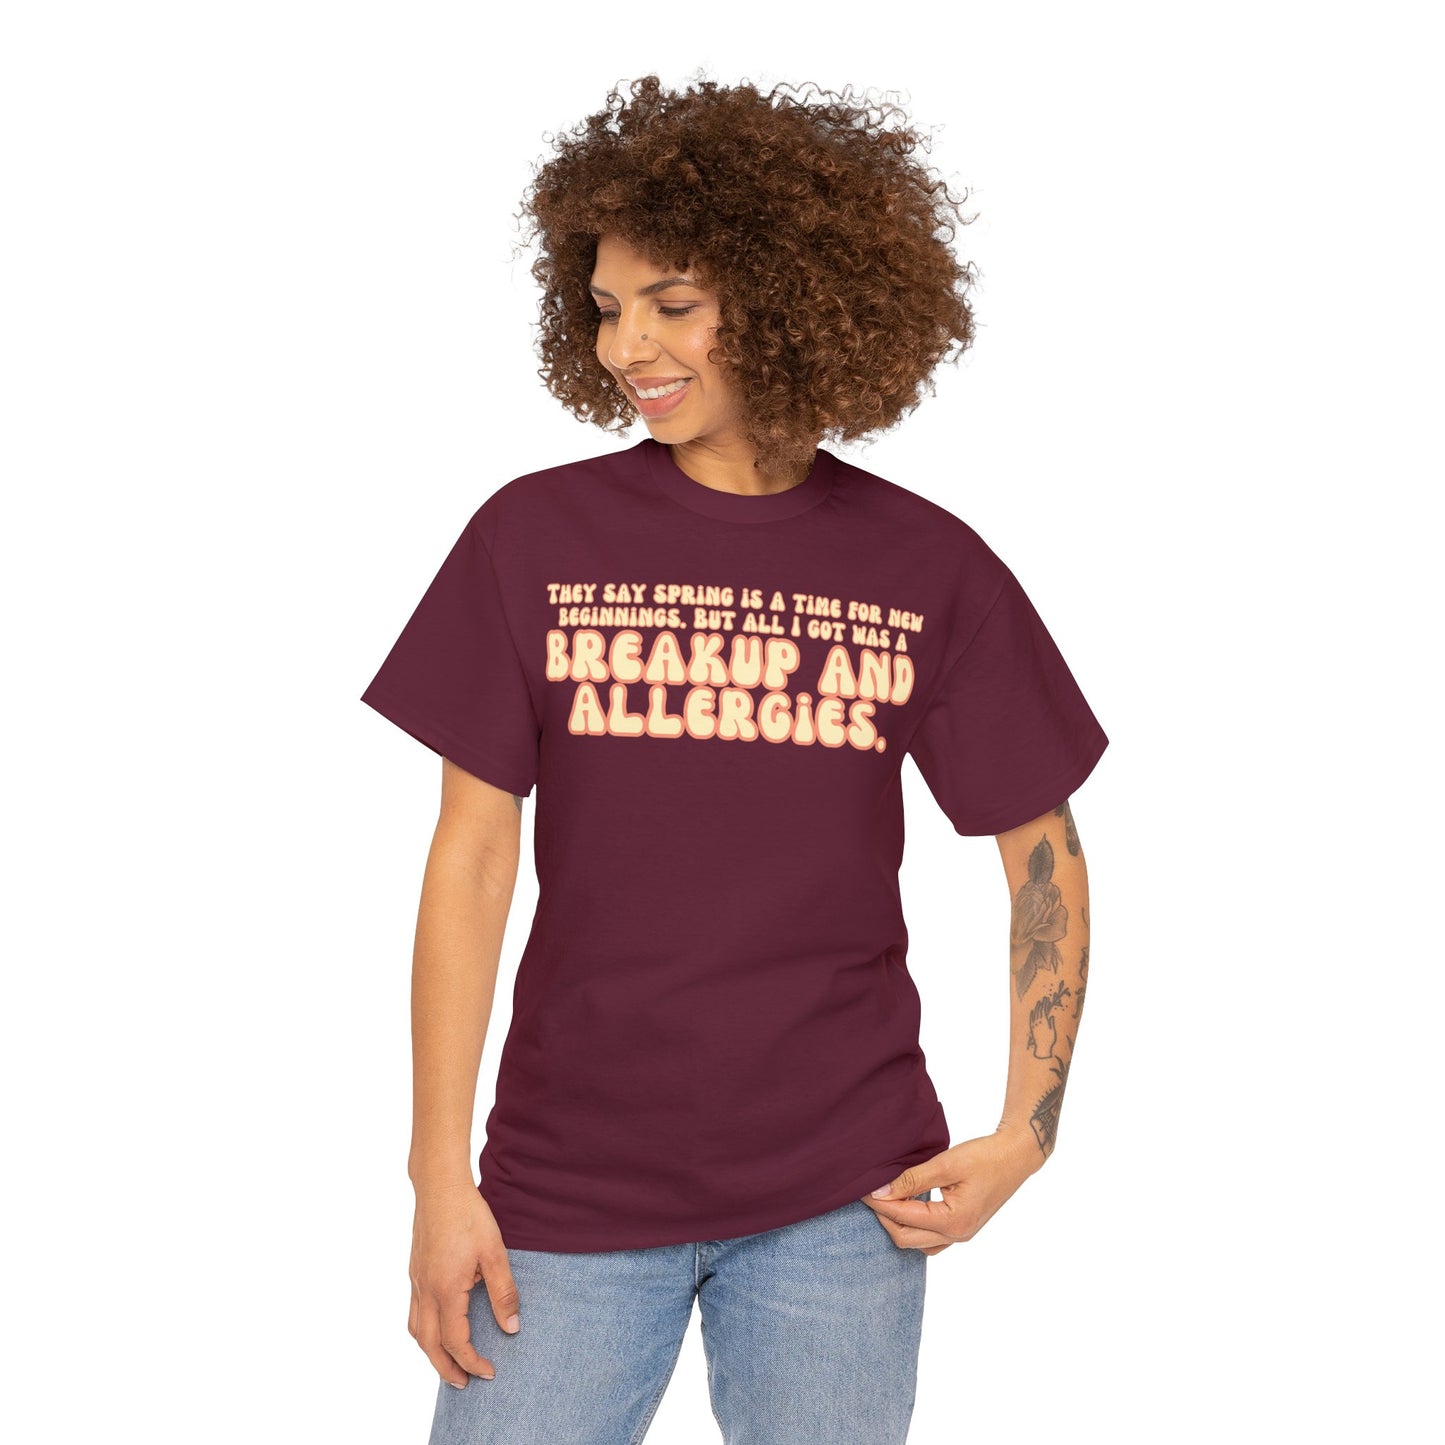 They Say Spring Is A Time For New Beginnings. But All I Got Was a Breakup And Allergies Tee